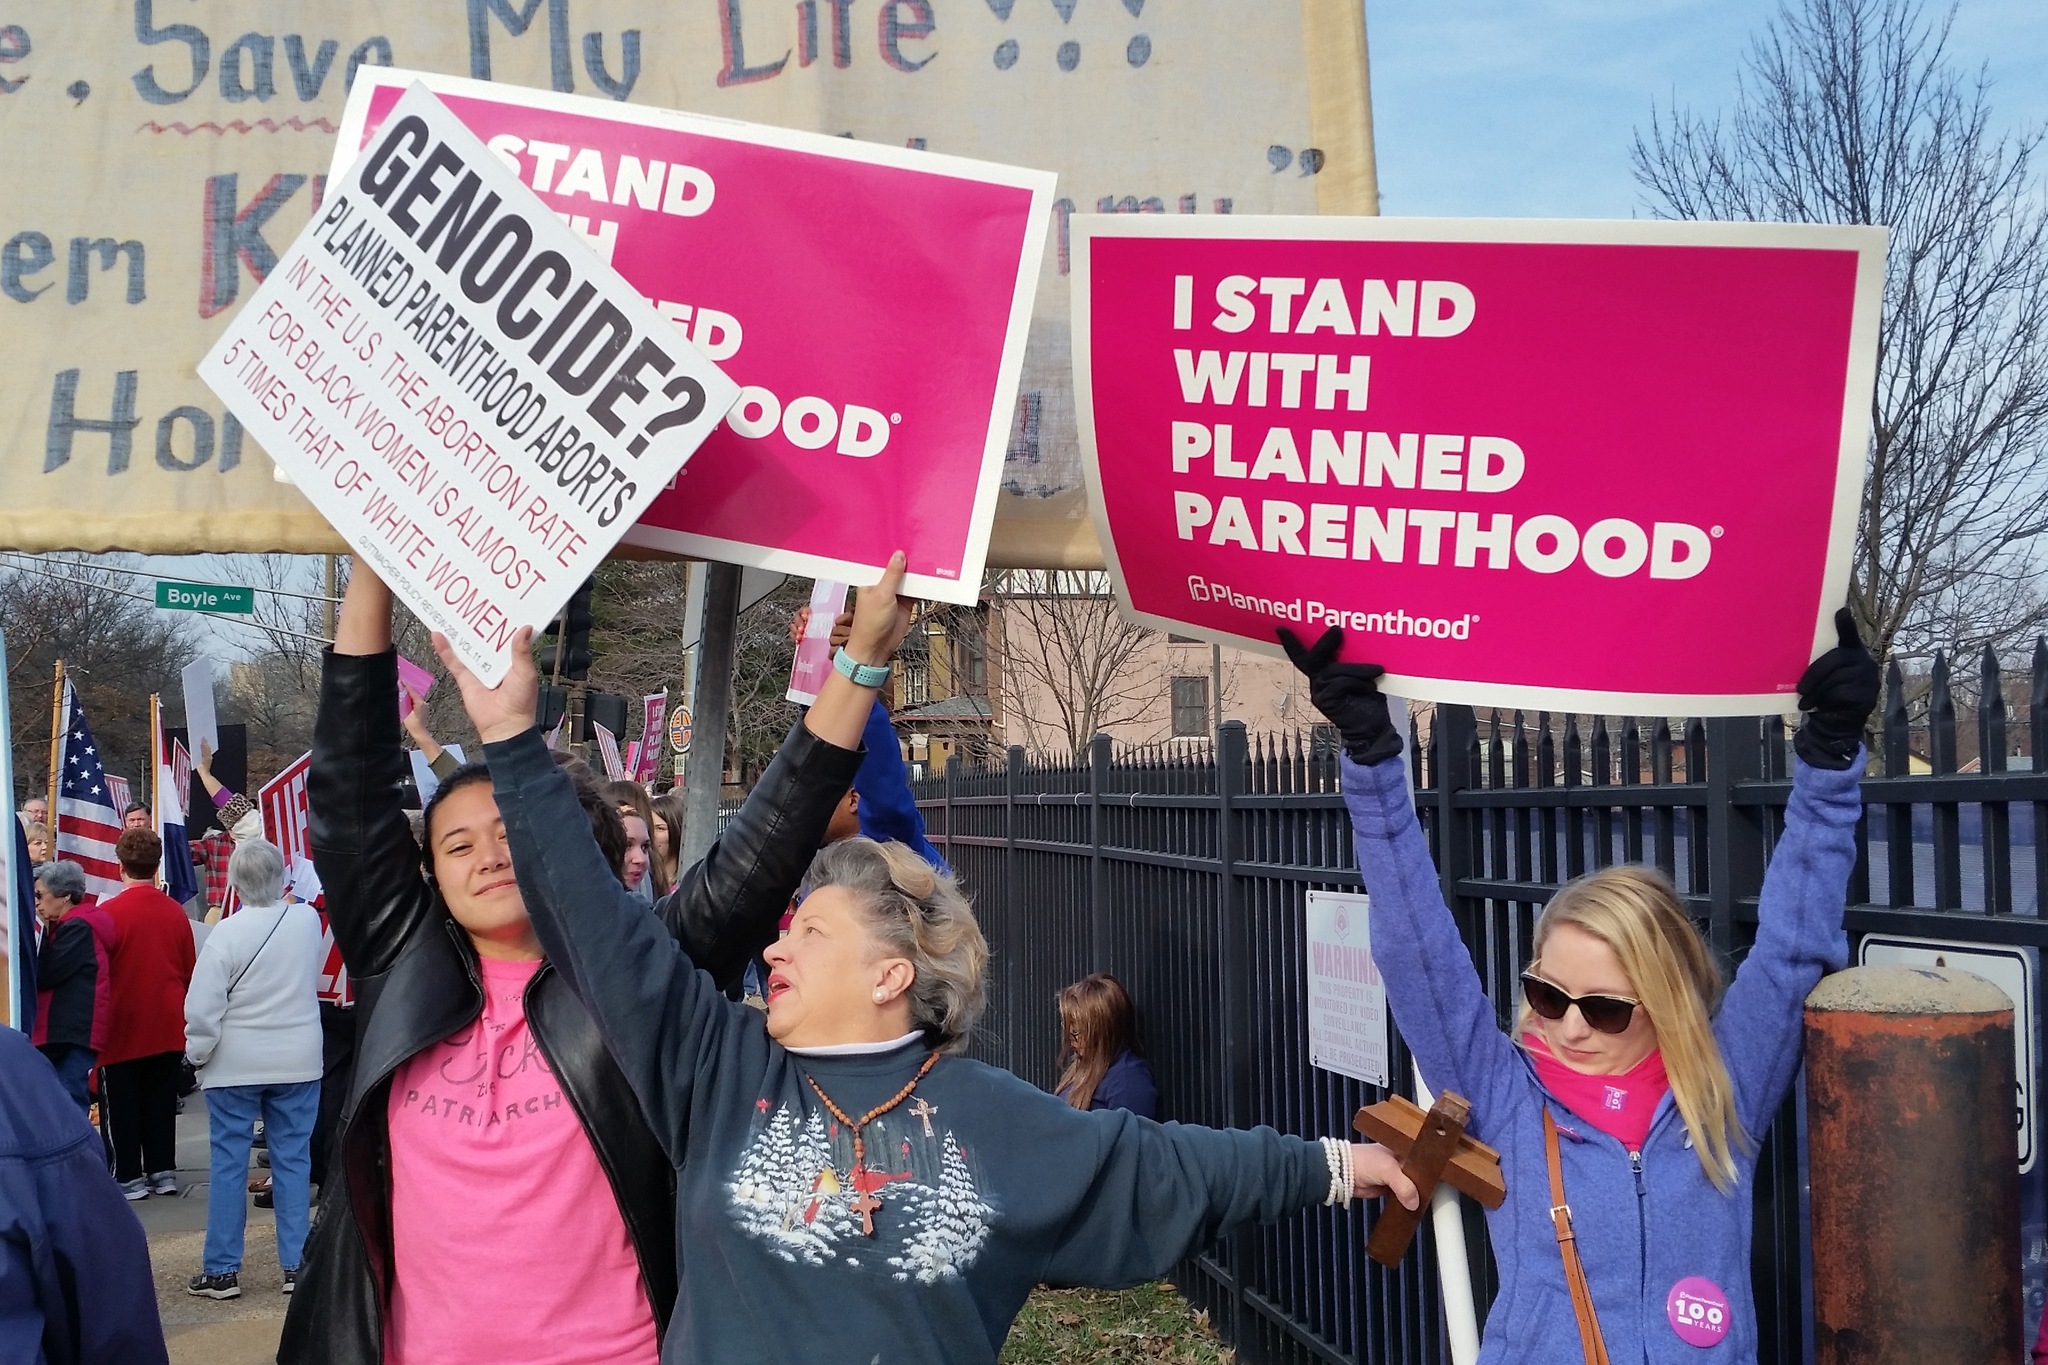 A Planned Parenthood supporter and opponent try to block each other’s signs during a protest and counter-protest Saturday in St. Louis. Rallies aimed at urging Congress and President Donald Trump to end federal funding for Planned Parenthood were scheduled across the country. (Jim Salter/The Associated Press)